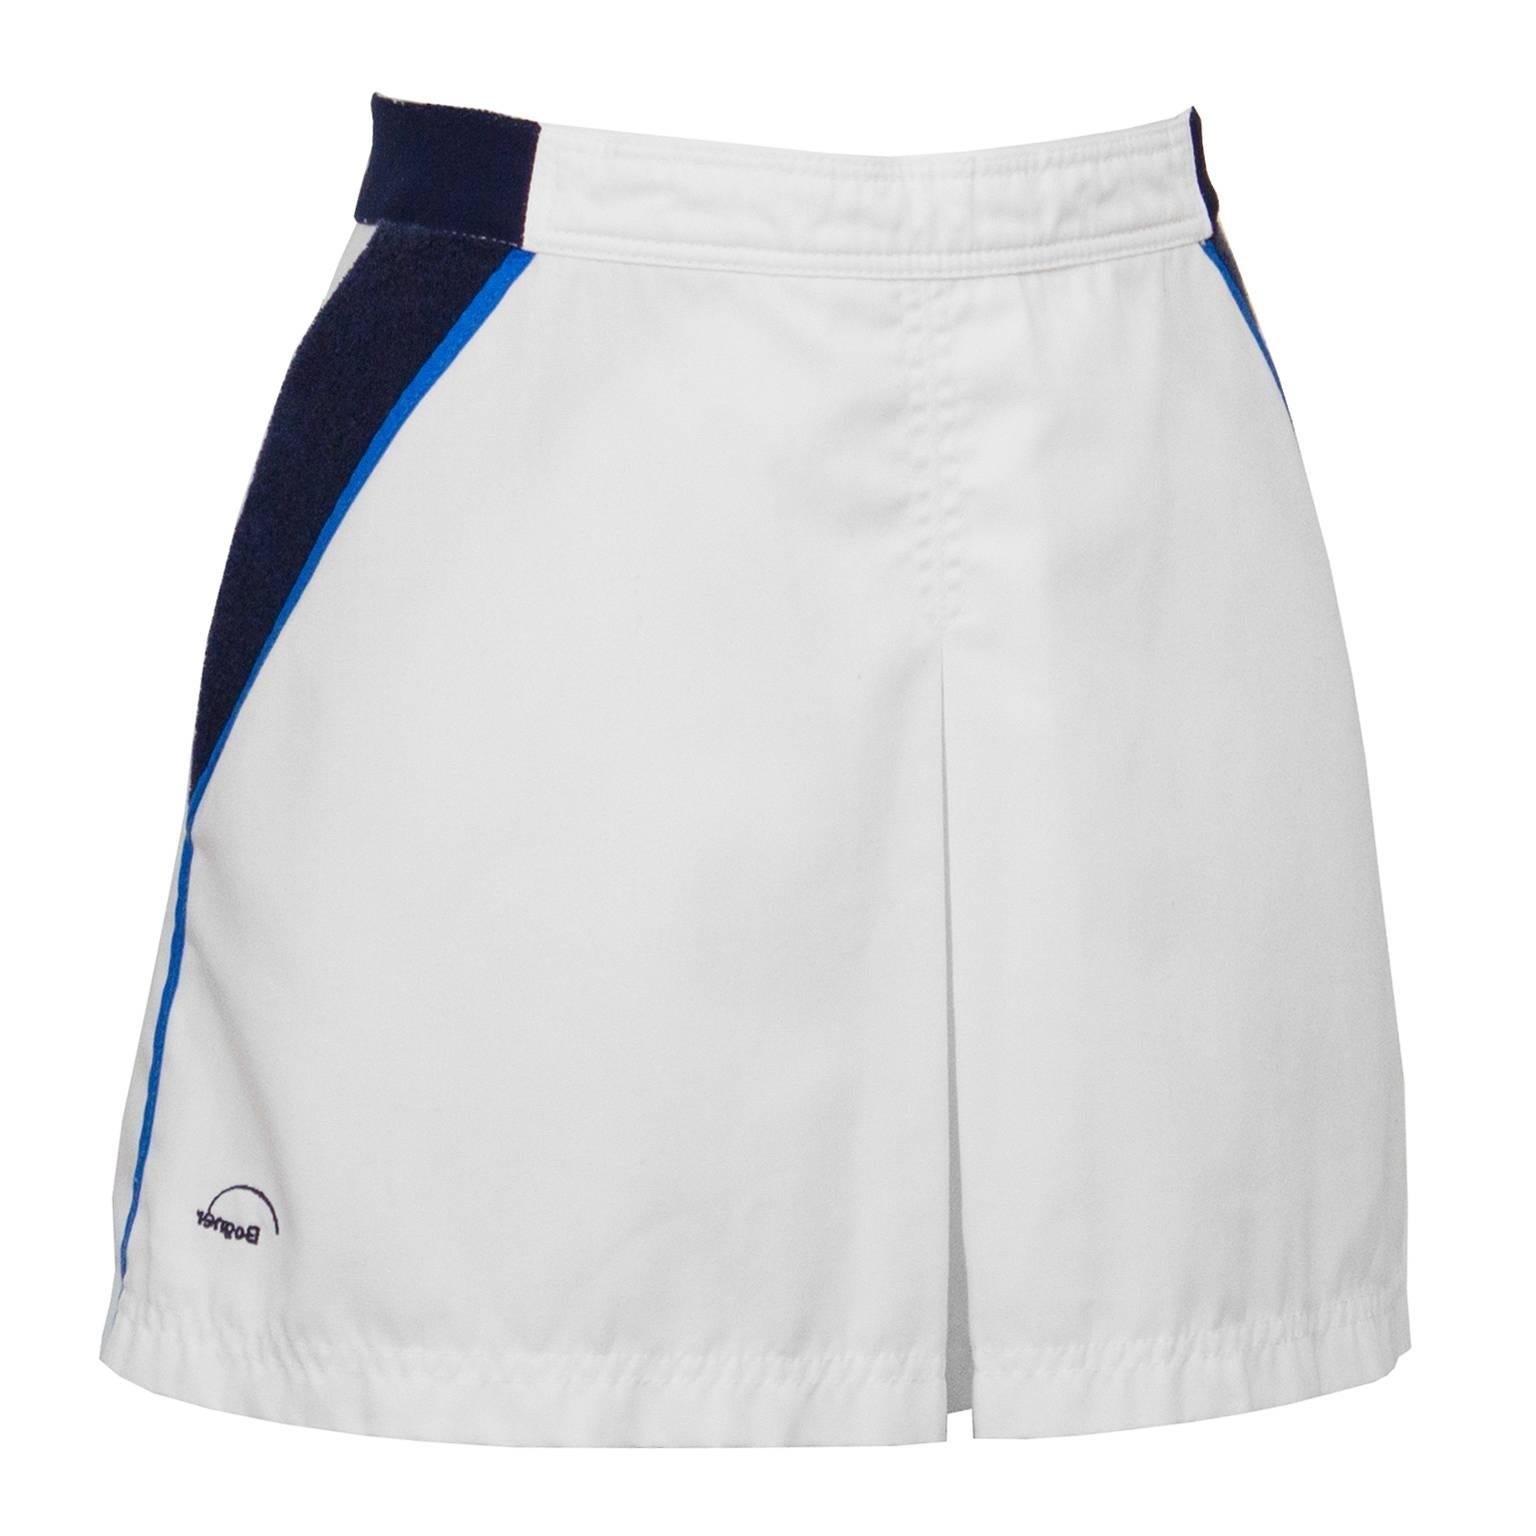 White cotton Bogner tennis skirt from the 1970's. White and navy banded waist, navy terry cloth side pockets and royal blue piping down the sides. One inverted front pleat gives the illusion that the skirt is shorts, finished with a navy embroidered